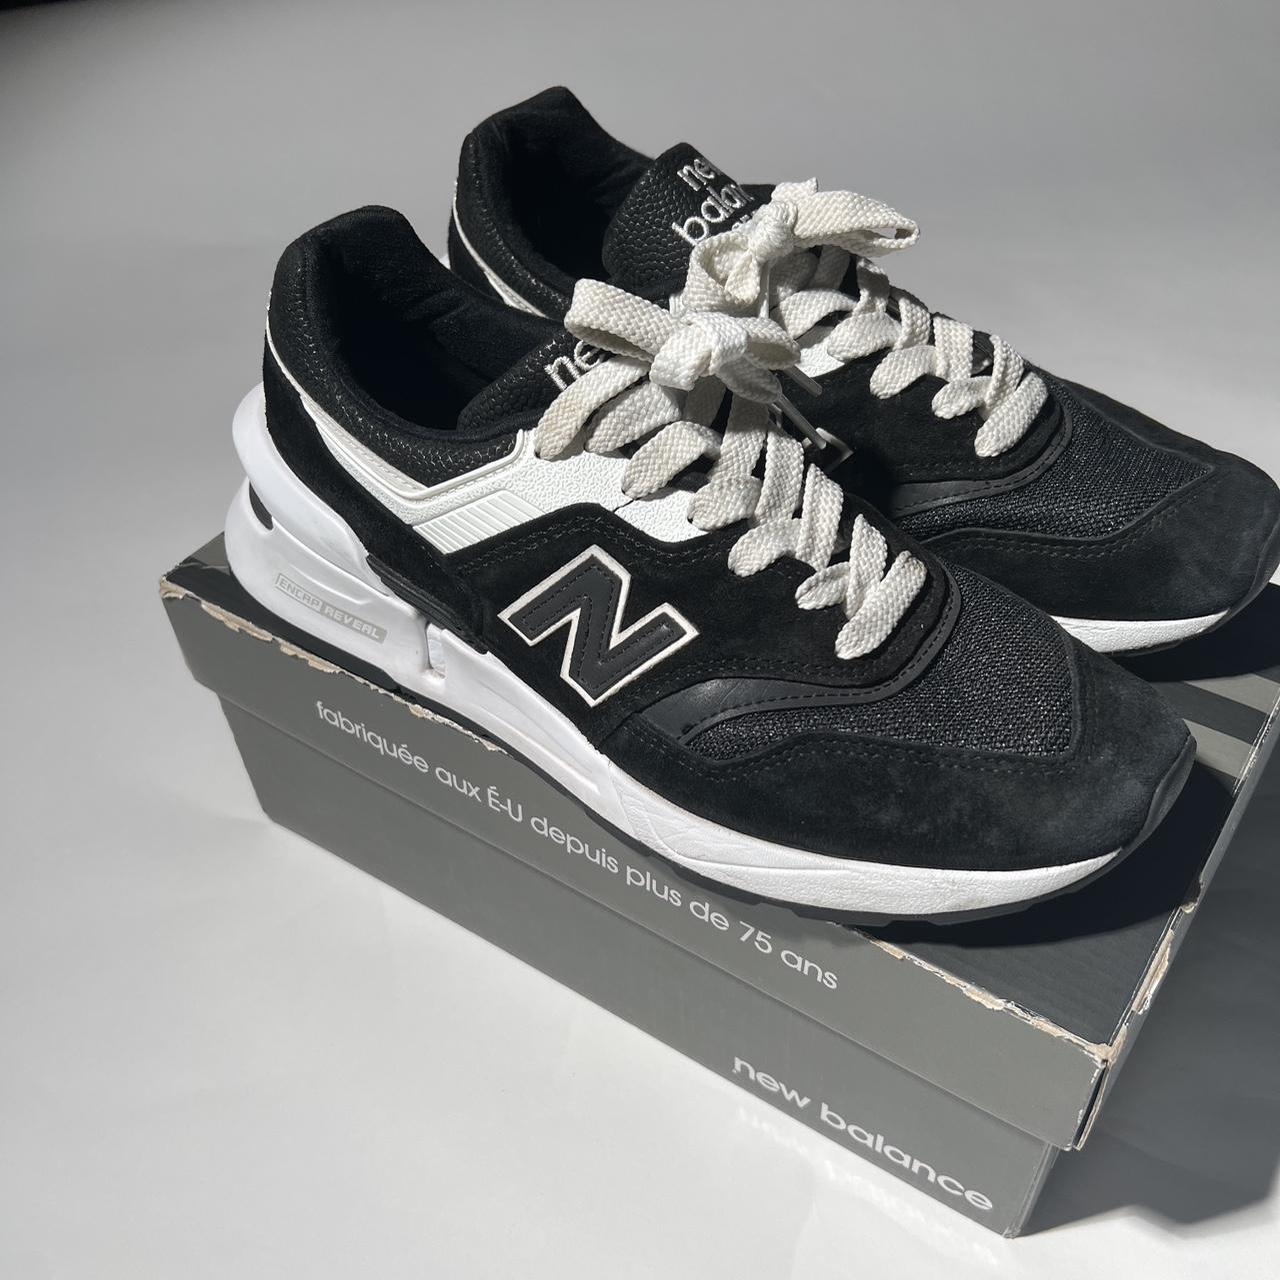 New Balance Men's Black and White Trainers - 1